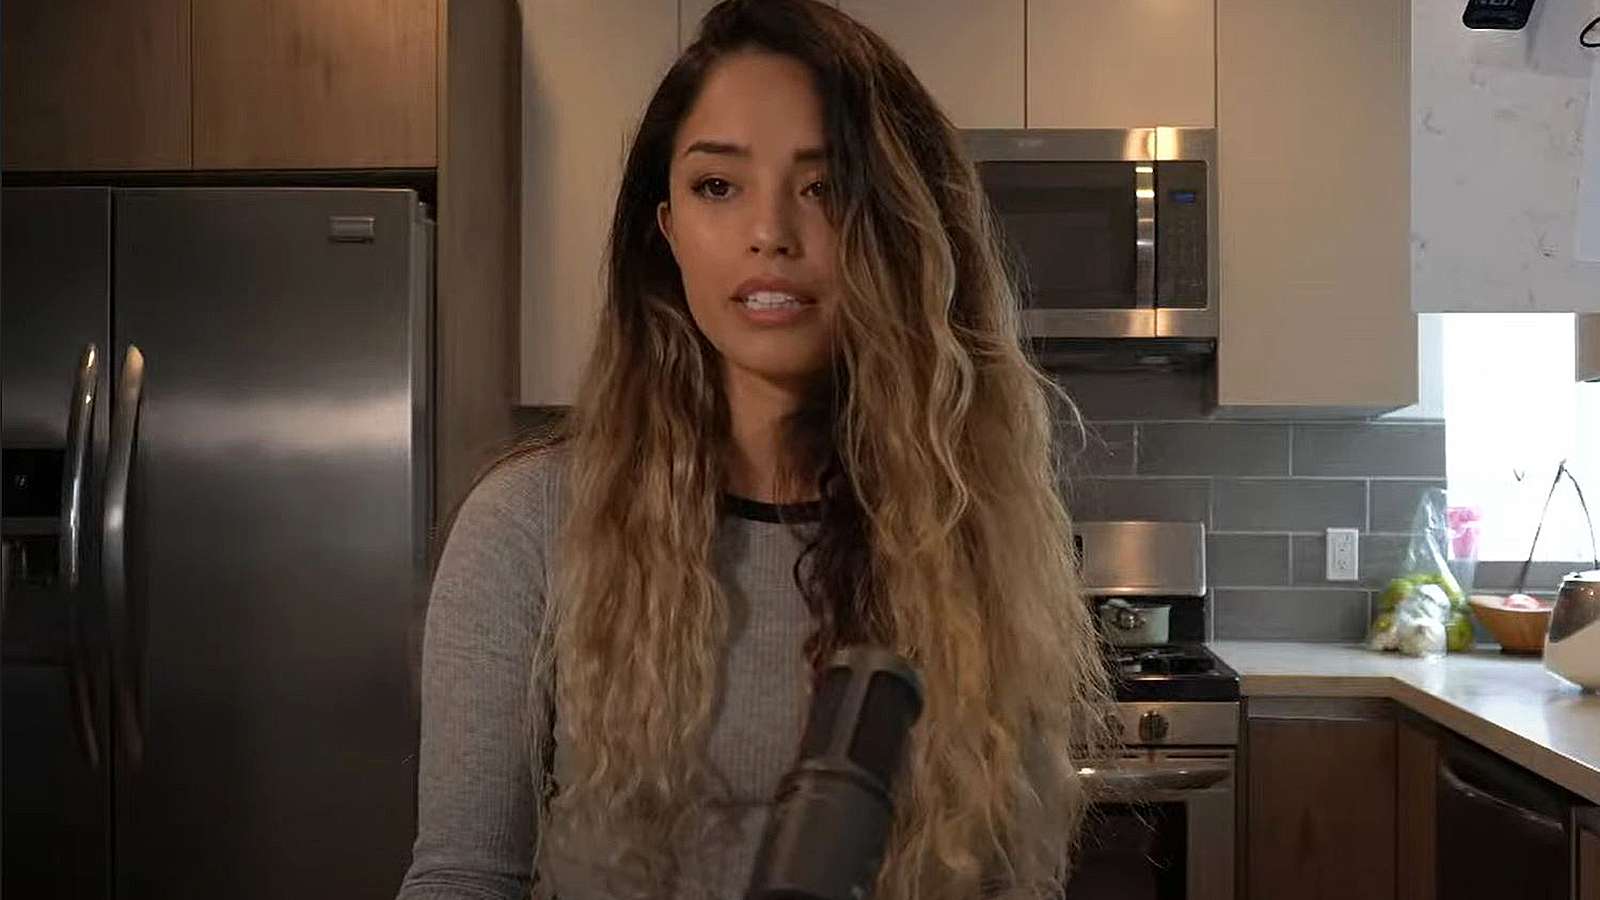 Valkyrae speaks to the camera from her kitchen.